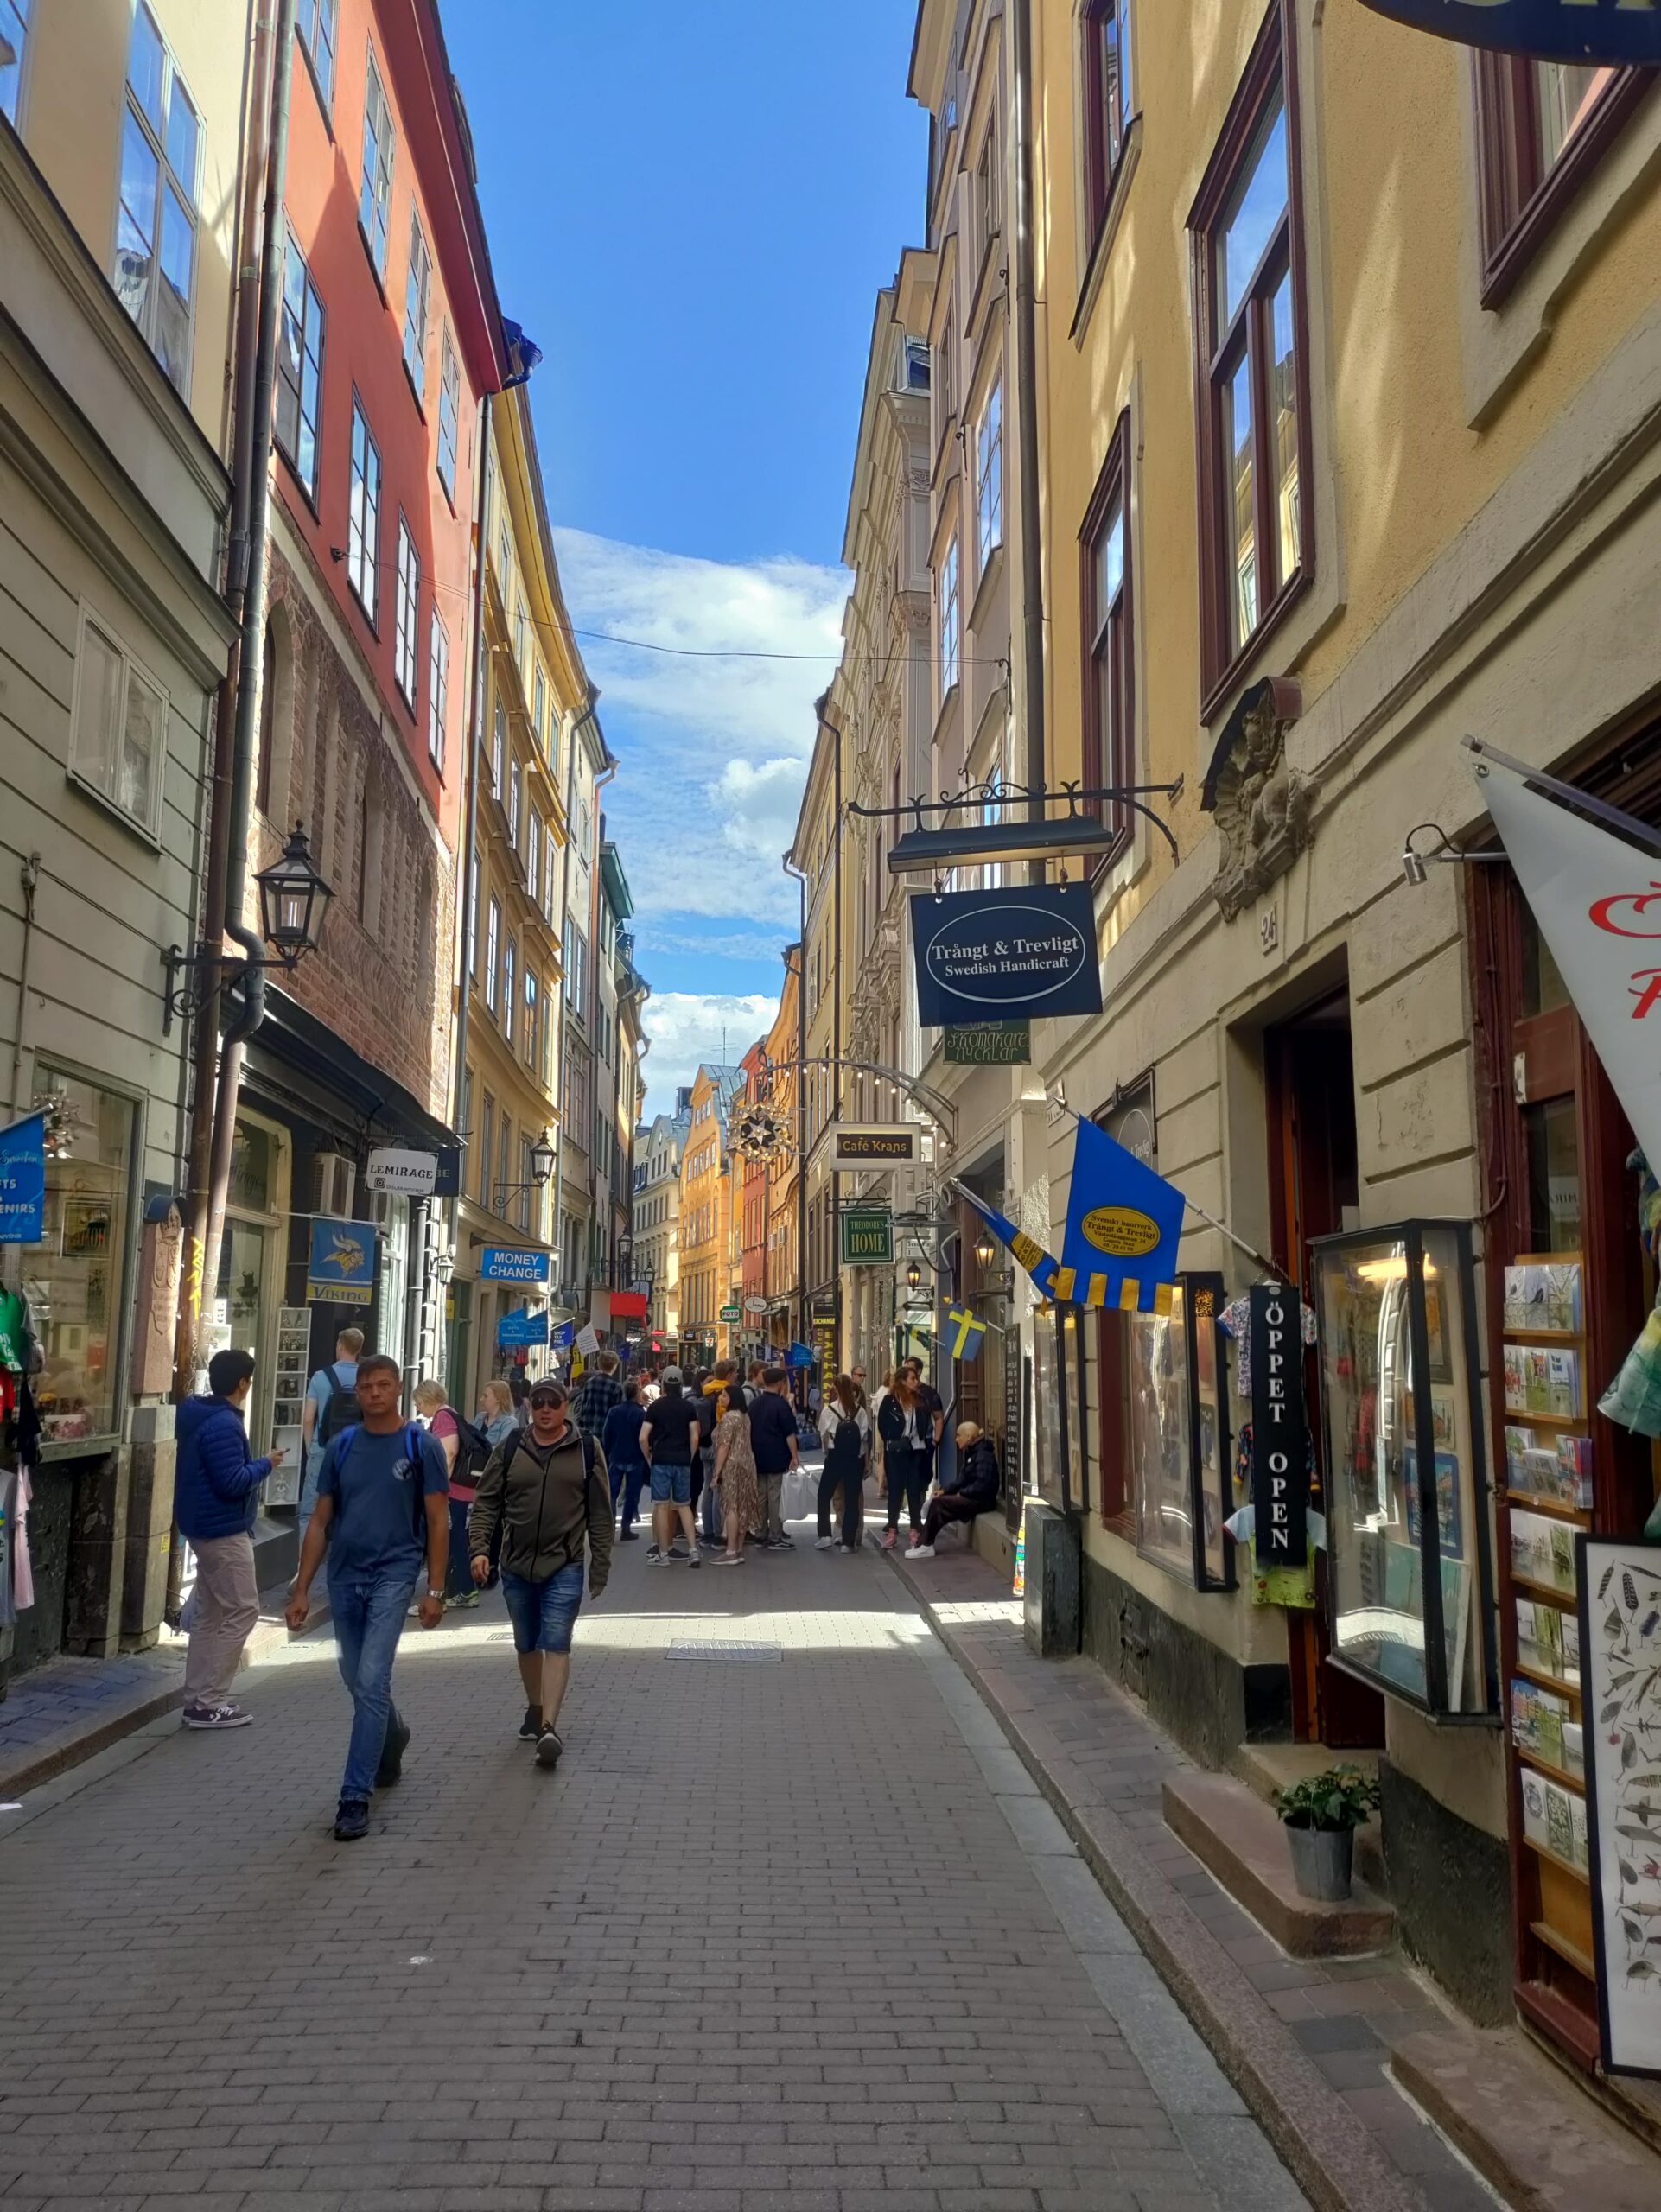 Sunny skies, sleek ships, and study hour: My first week in Stockholm